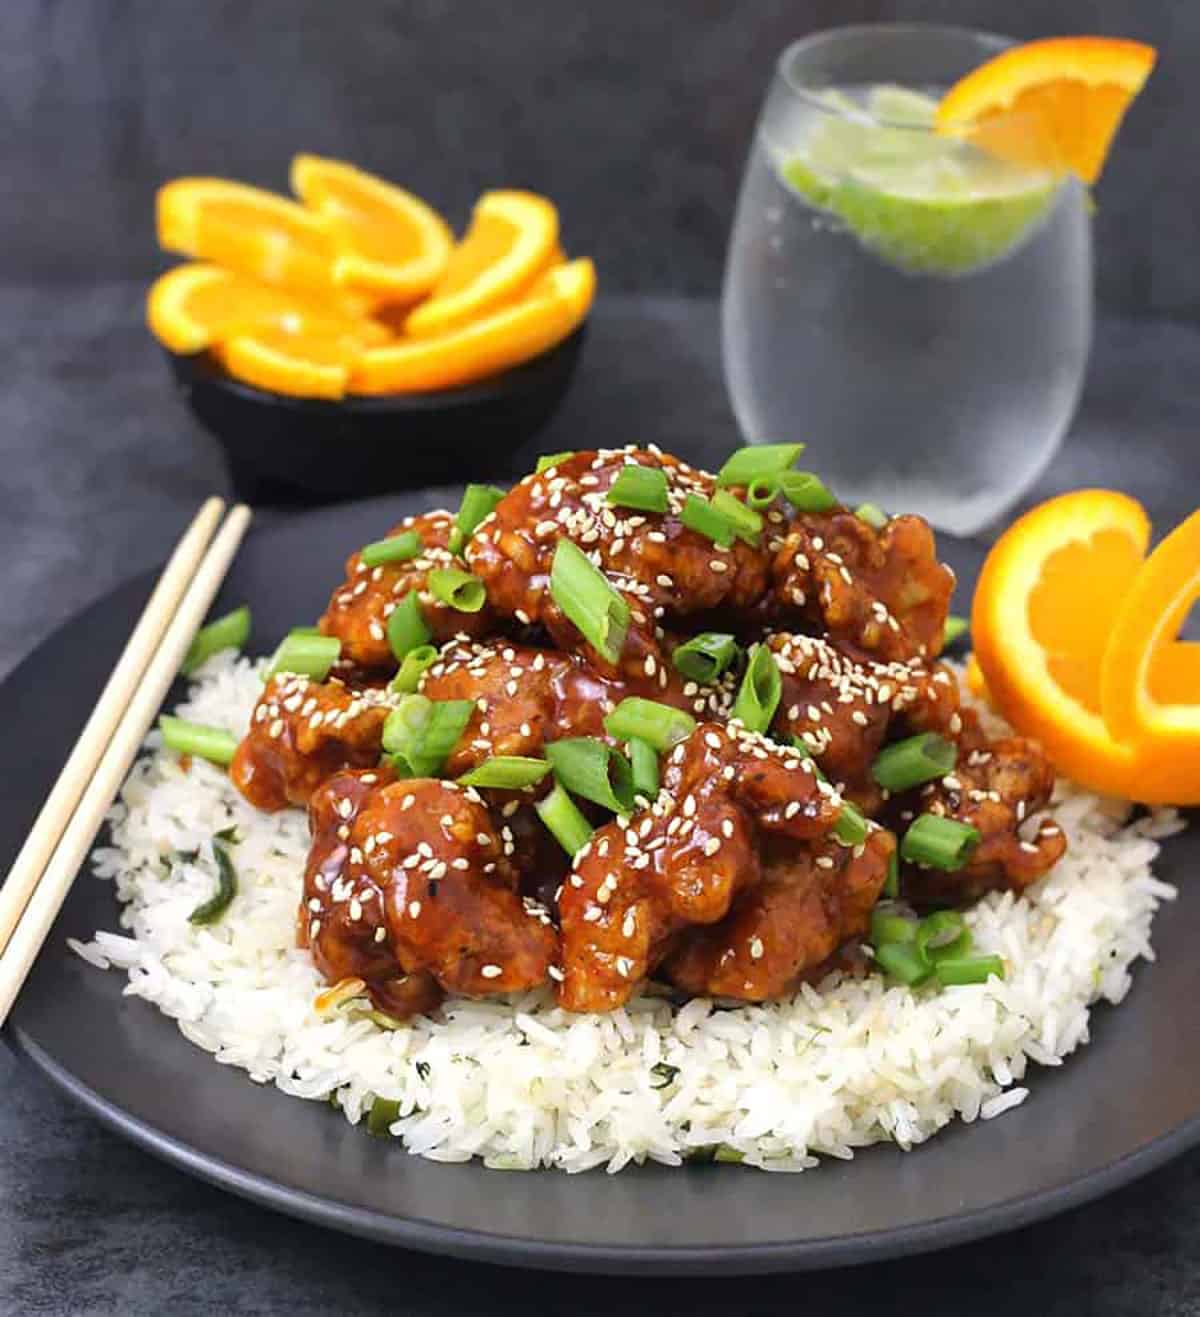 Orange chicken garnished with spring onions and toasted sesame seeds served over a bed of steamed rice. 